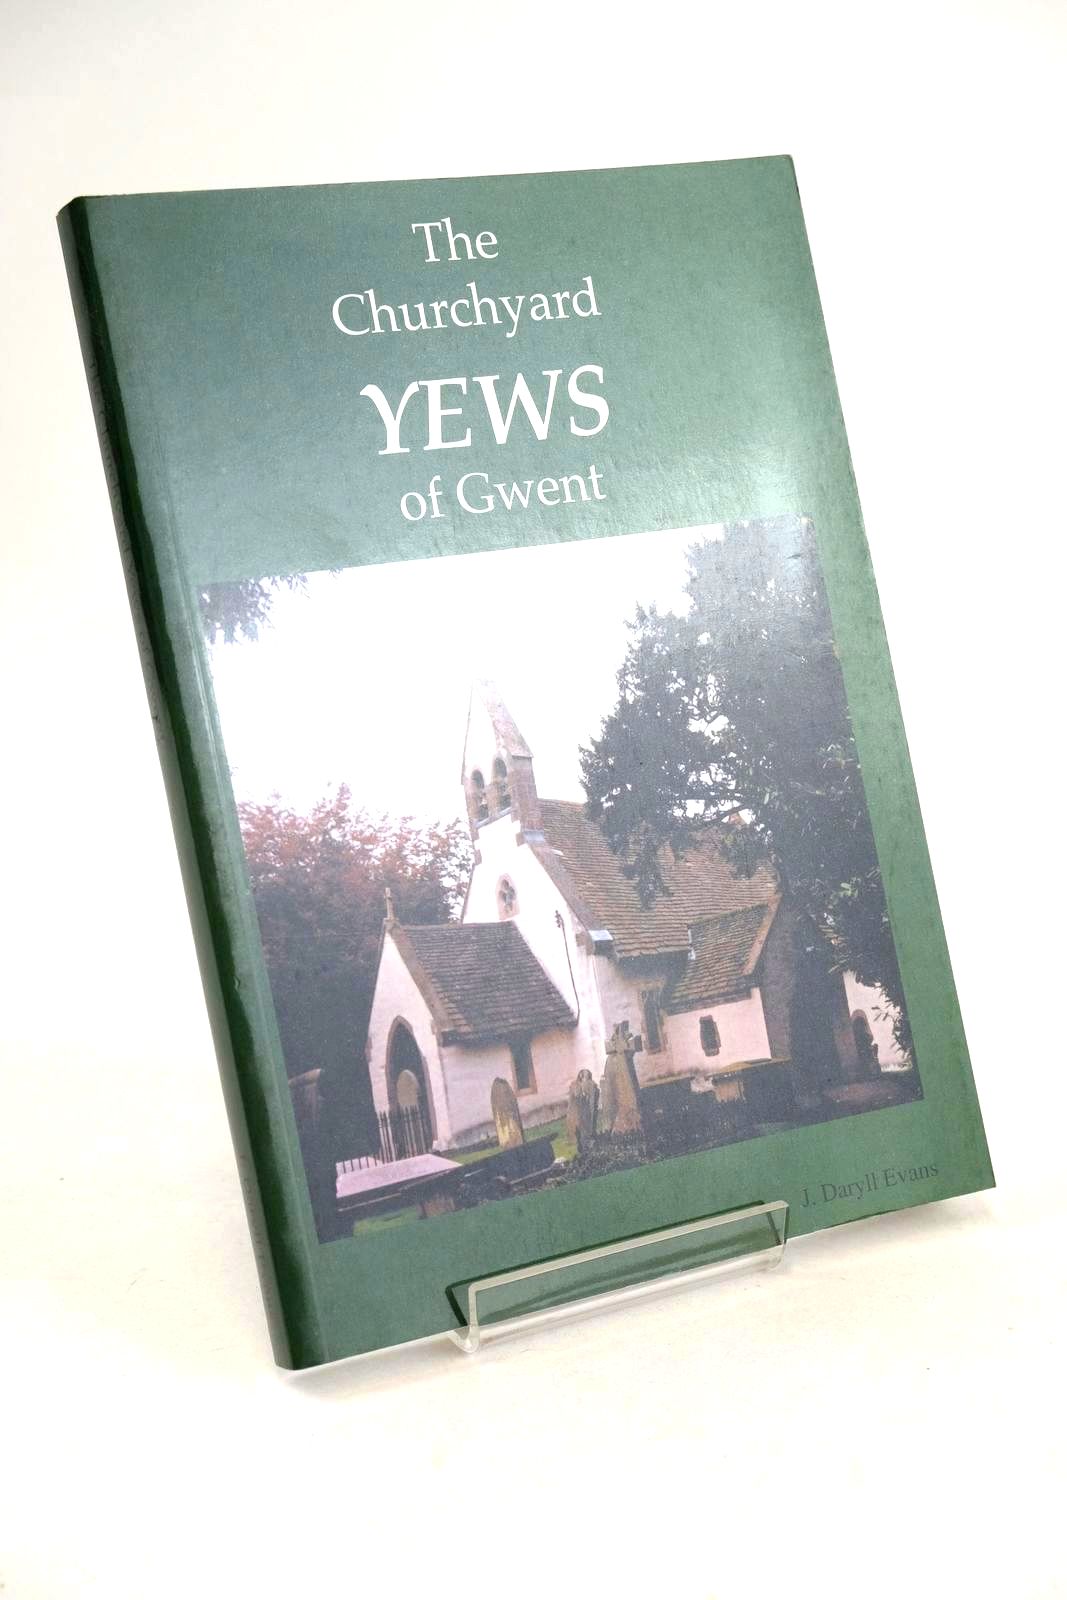 Photo of THE CHURCHYARD YEWS OF GWENT written by Evans, J. Daryll published by Archangel Press (STOCK CODE: 1326390)  for sale by Stella & Rose's Books